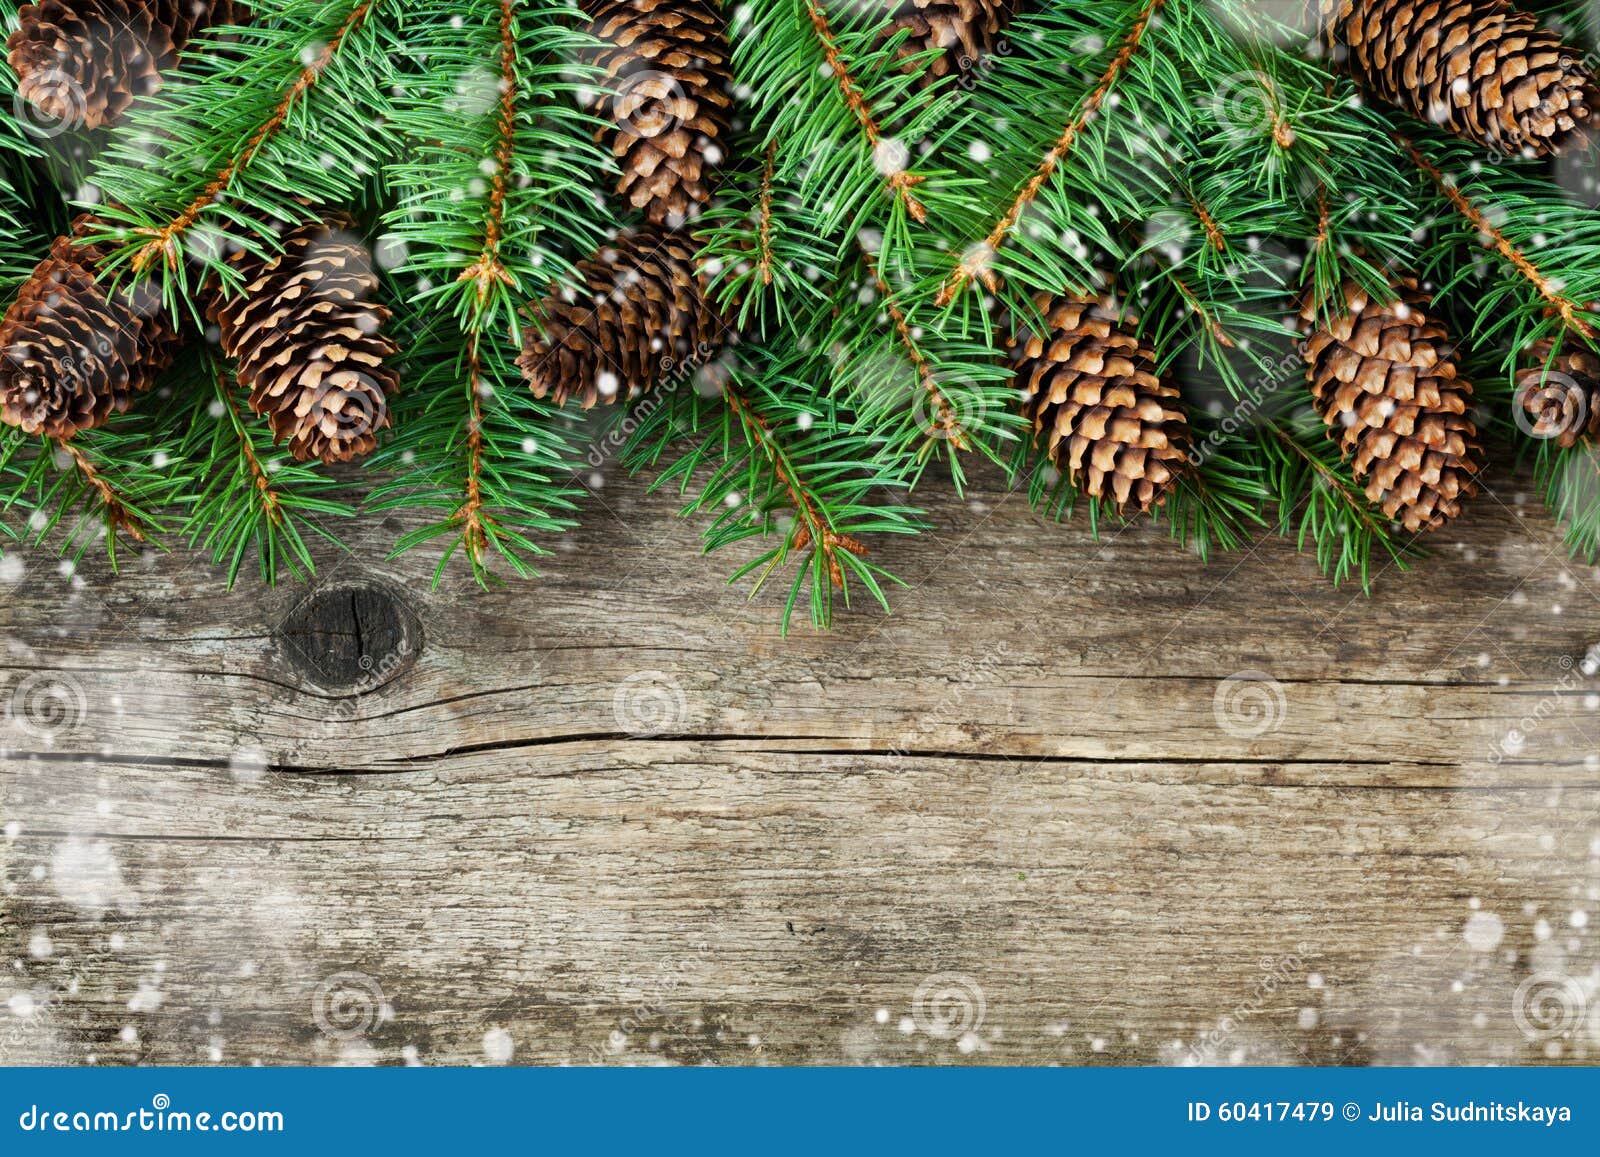 christmas decoration of fir tree and conifer cone on textured wood background, magic snow effect